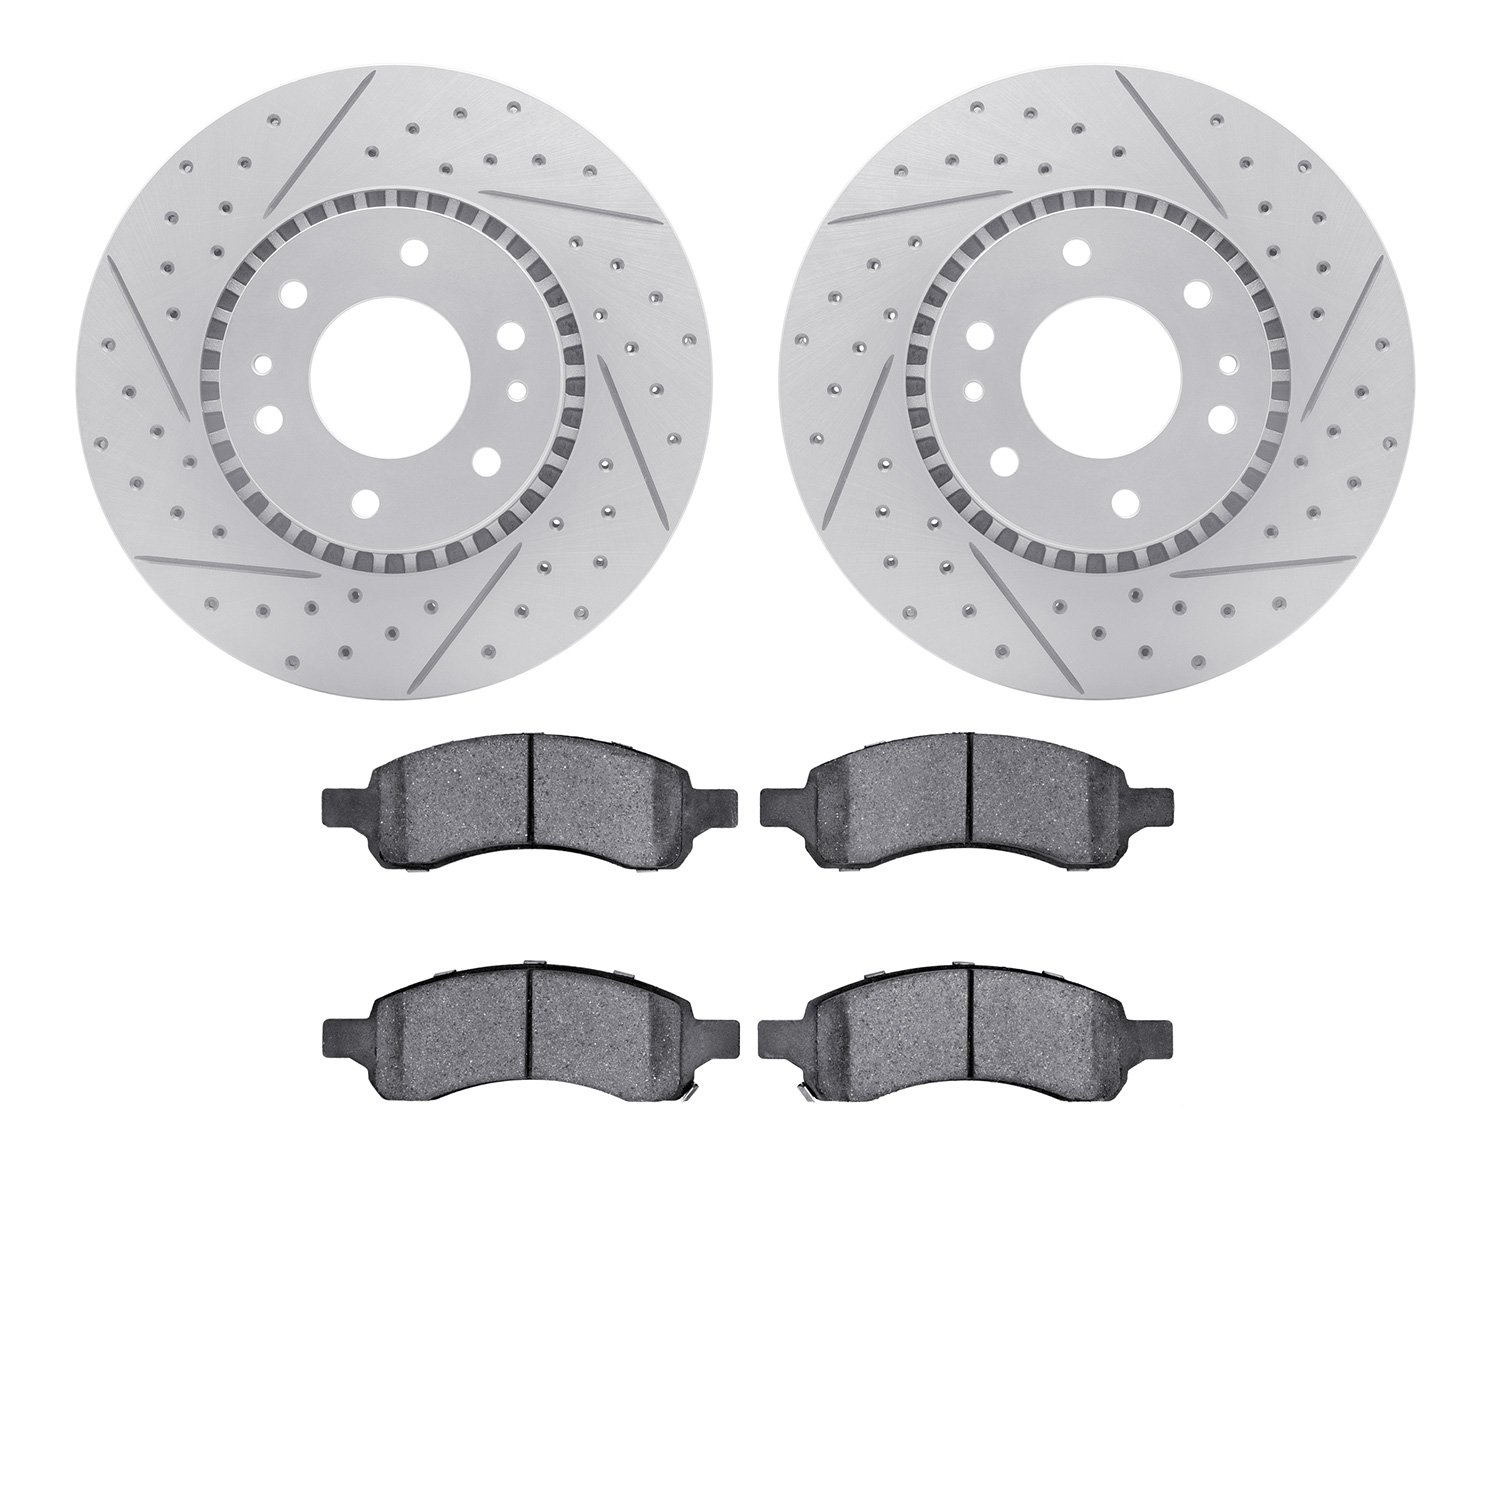 2402-48020 Geoperformance Drilled/Slotted Brake Rotors with Ultimate-Duty Brake Pads Kit, 2006-2009 GM, Position: Front